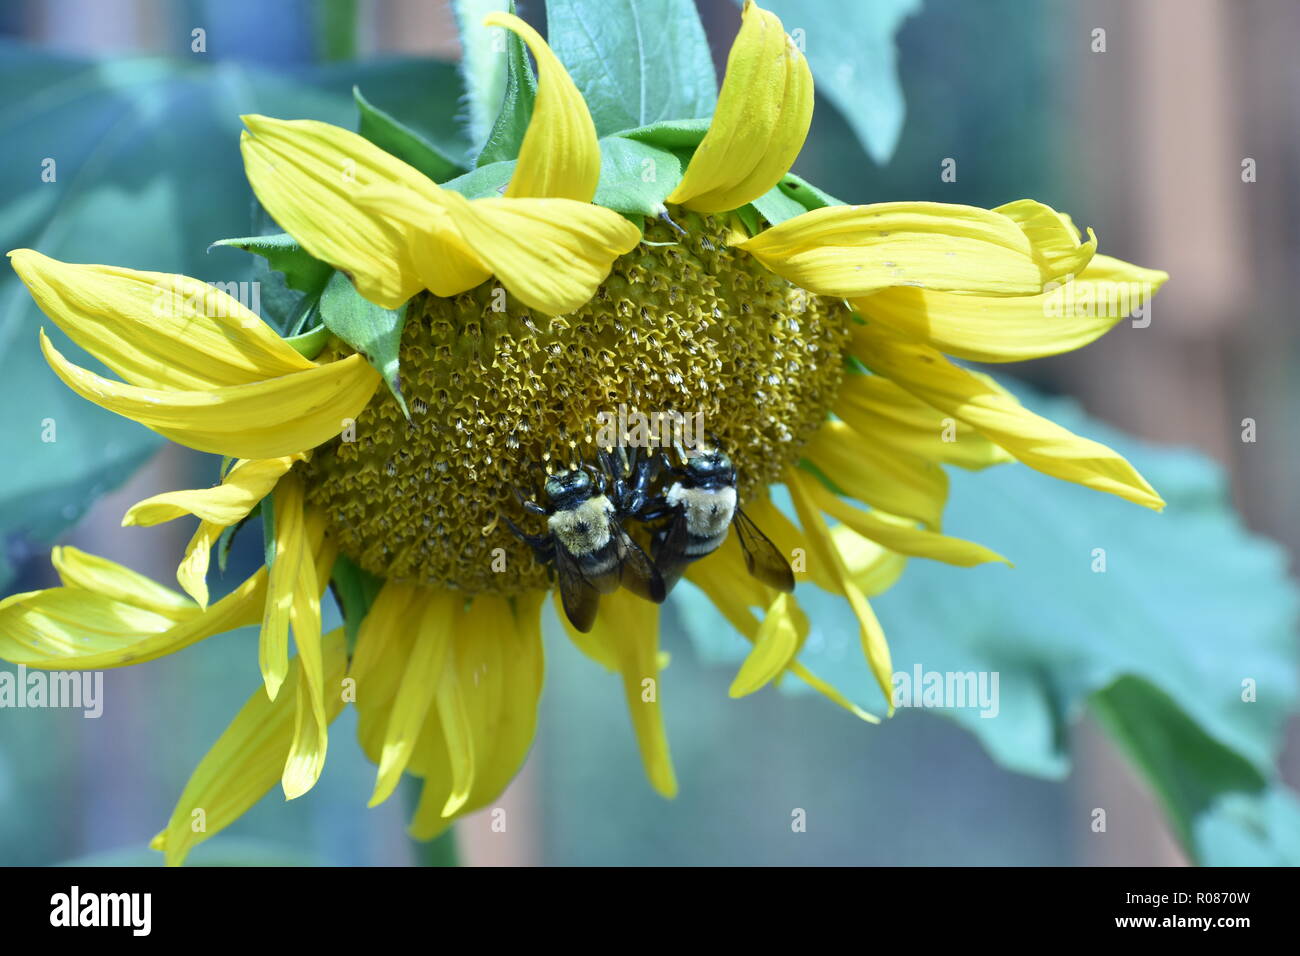 Closeup of a yellow sunflower with two carpenter bees collecting pollen Stock Photo